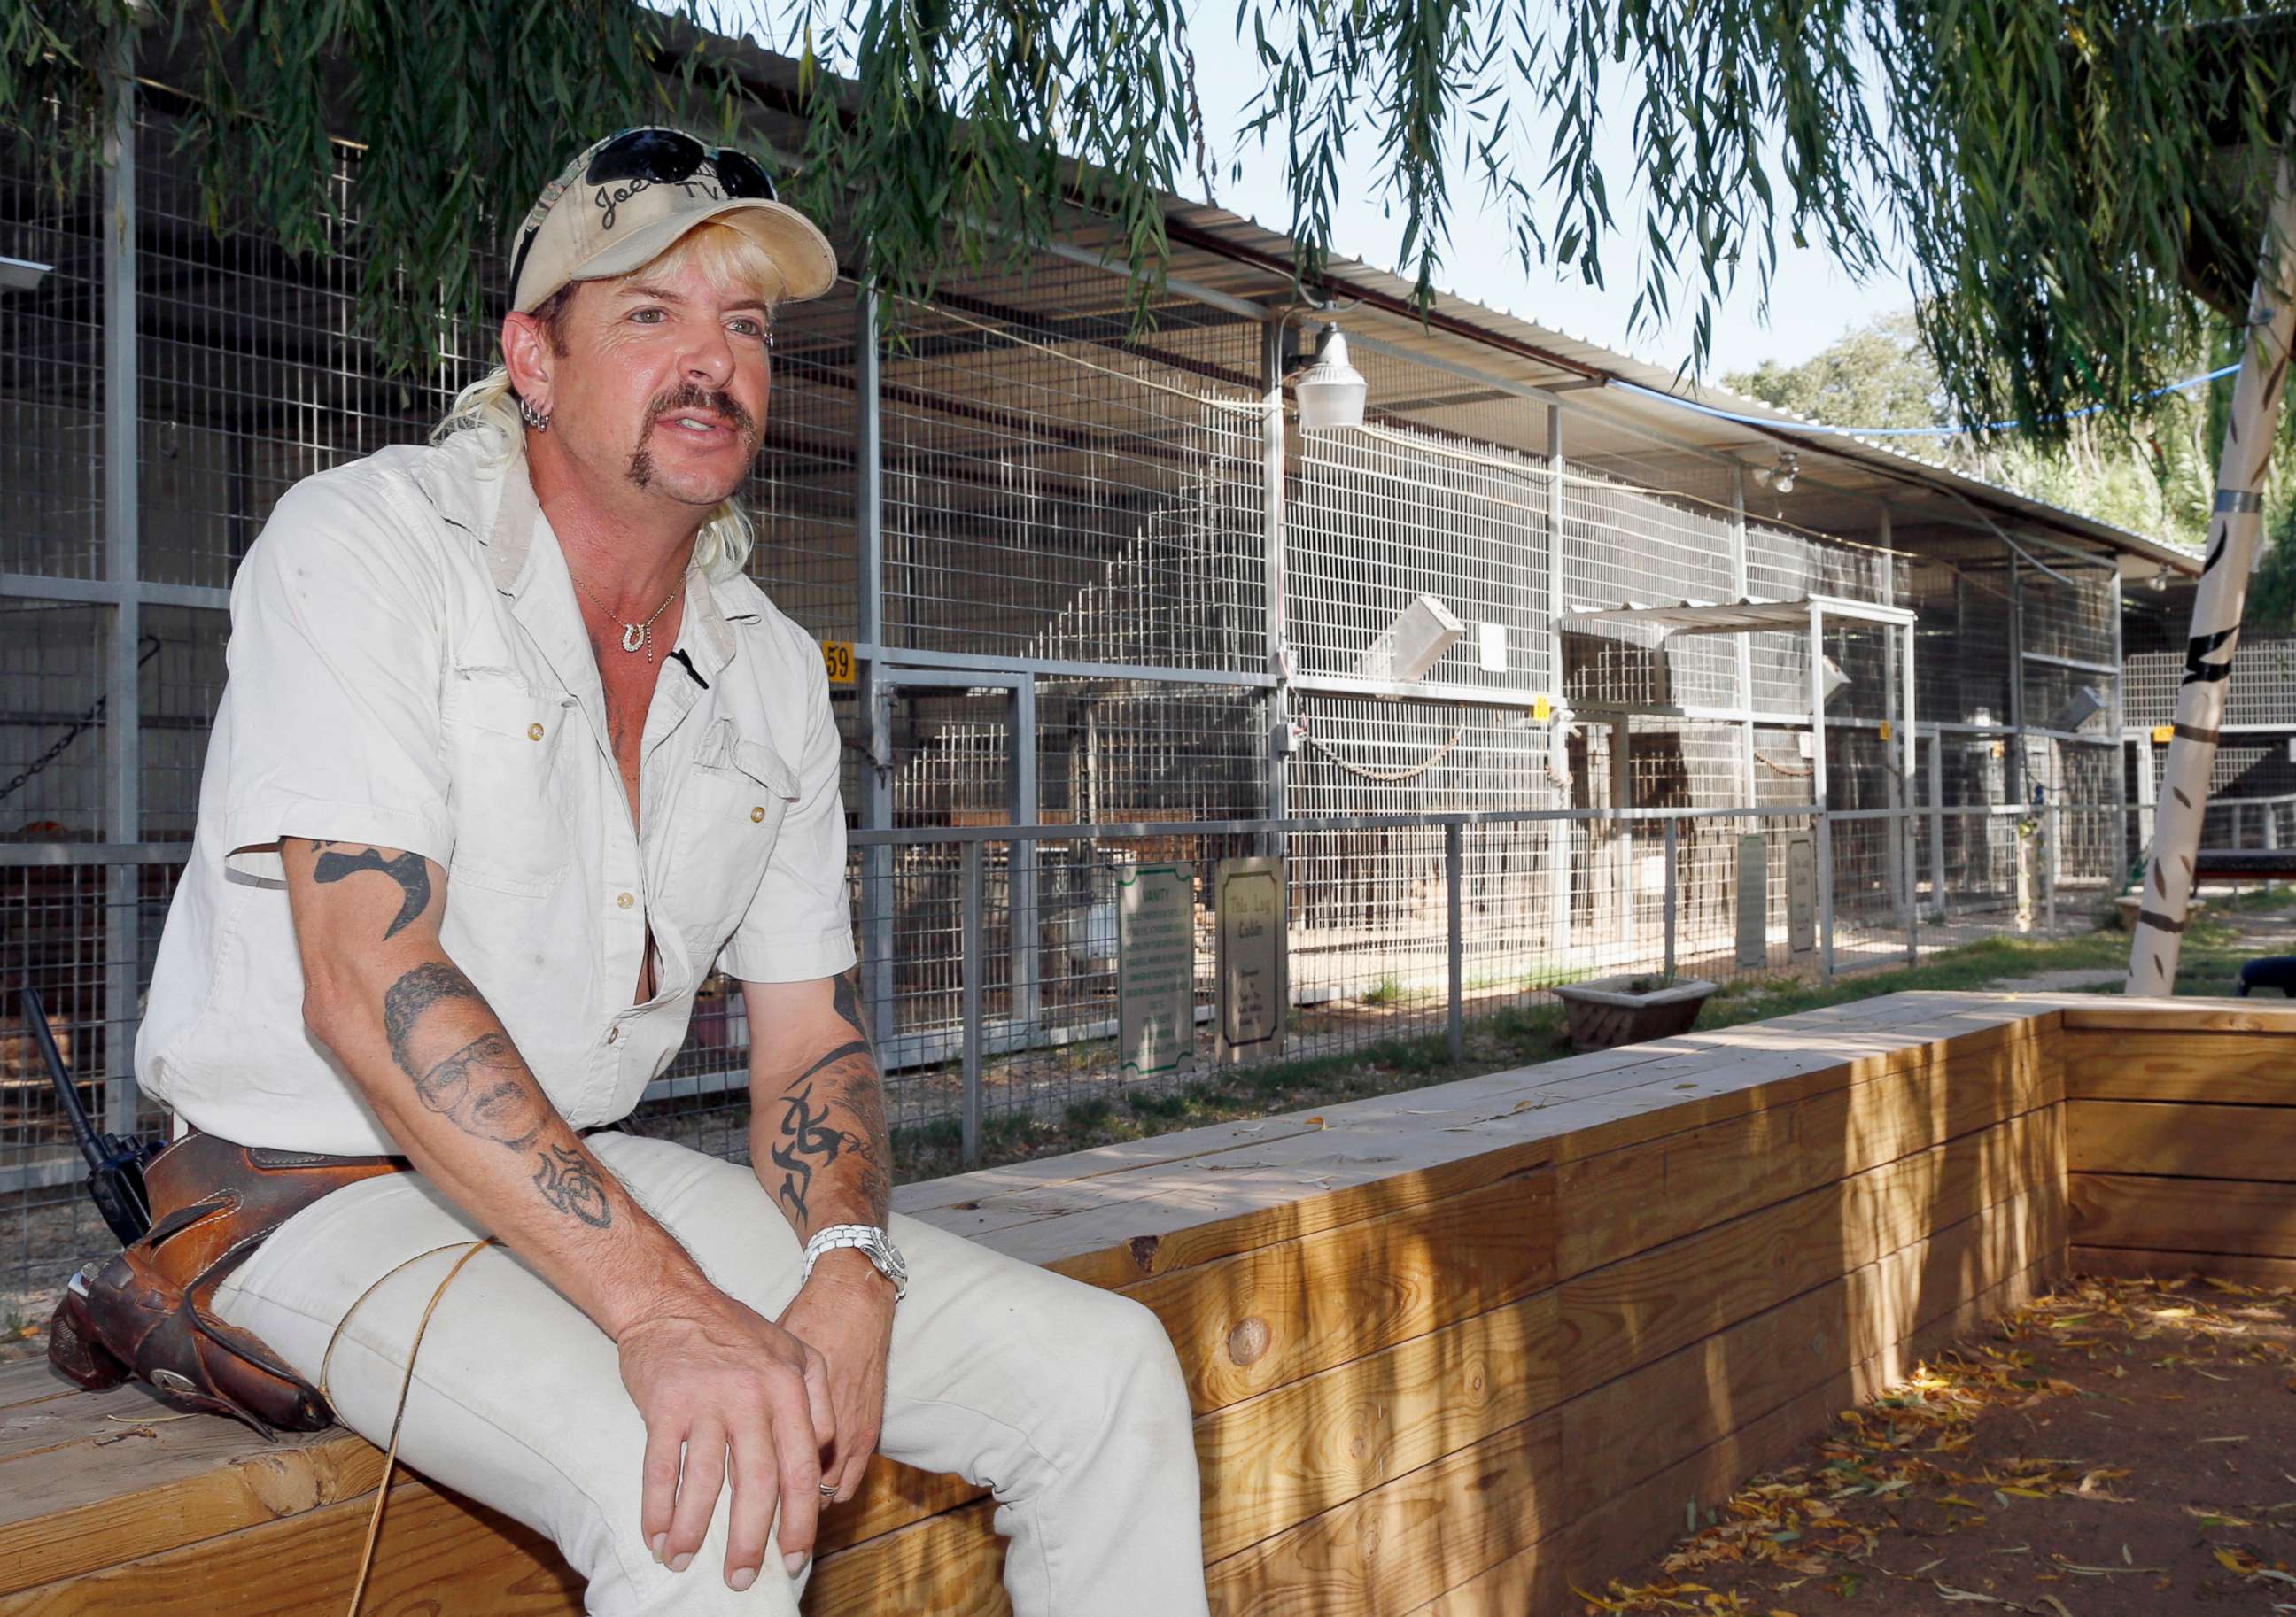 PHOTO: In this Aug. 28, 2013, file photo, Joseph Maldonado, also known as Joe Exotic, answers a question during an interview at the zoo he runs in Wynnewood, Okla.